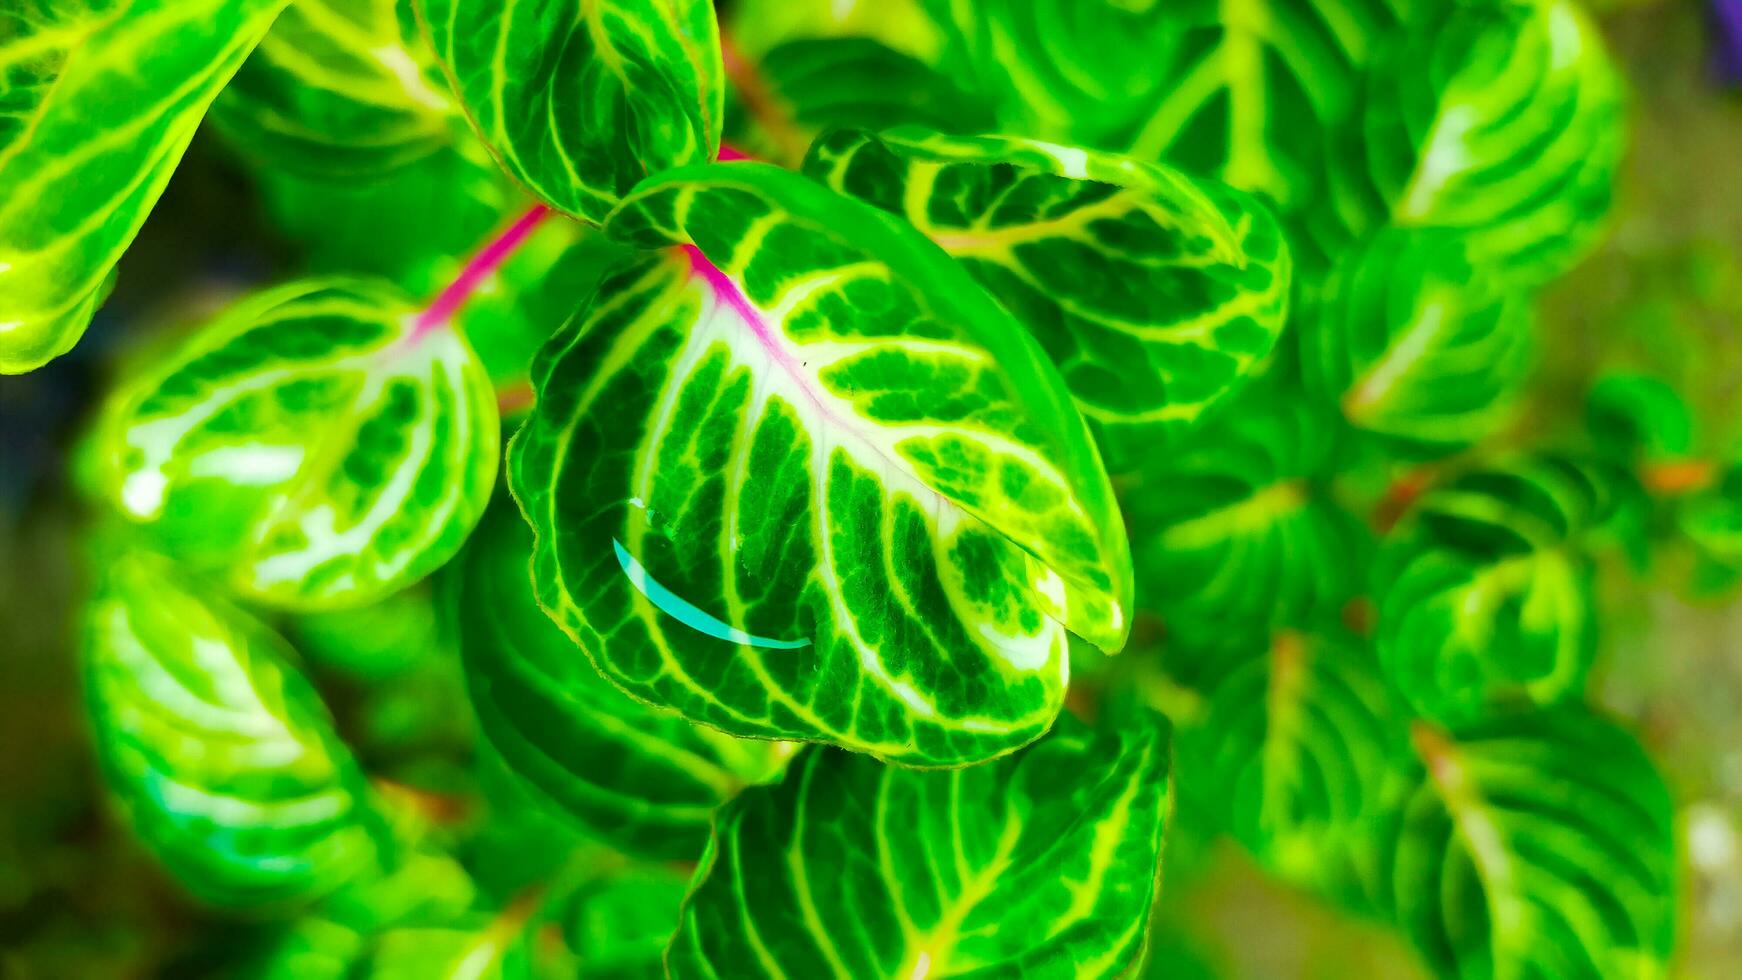 green leaves patterned with red stems photo